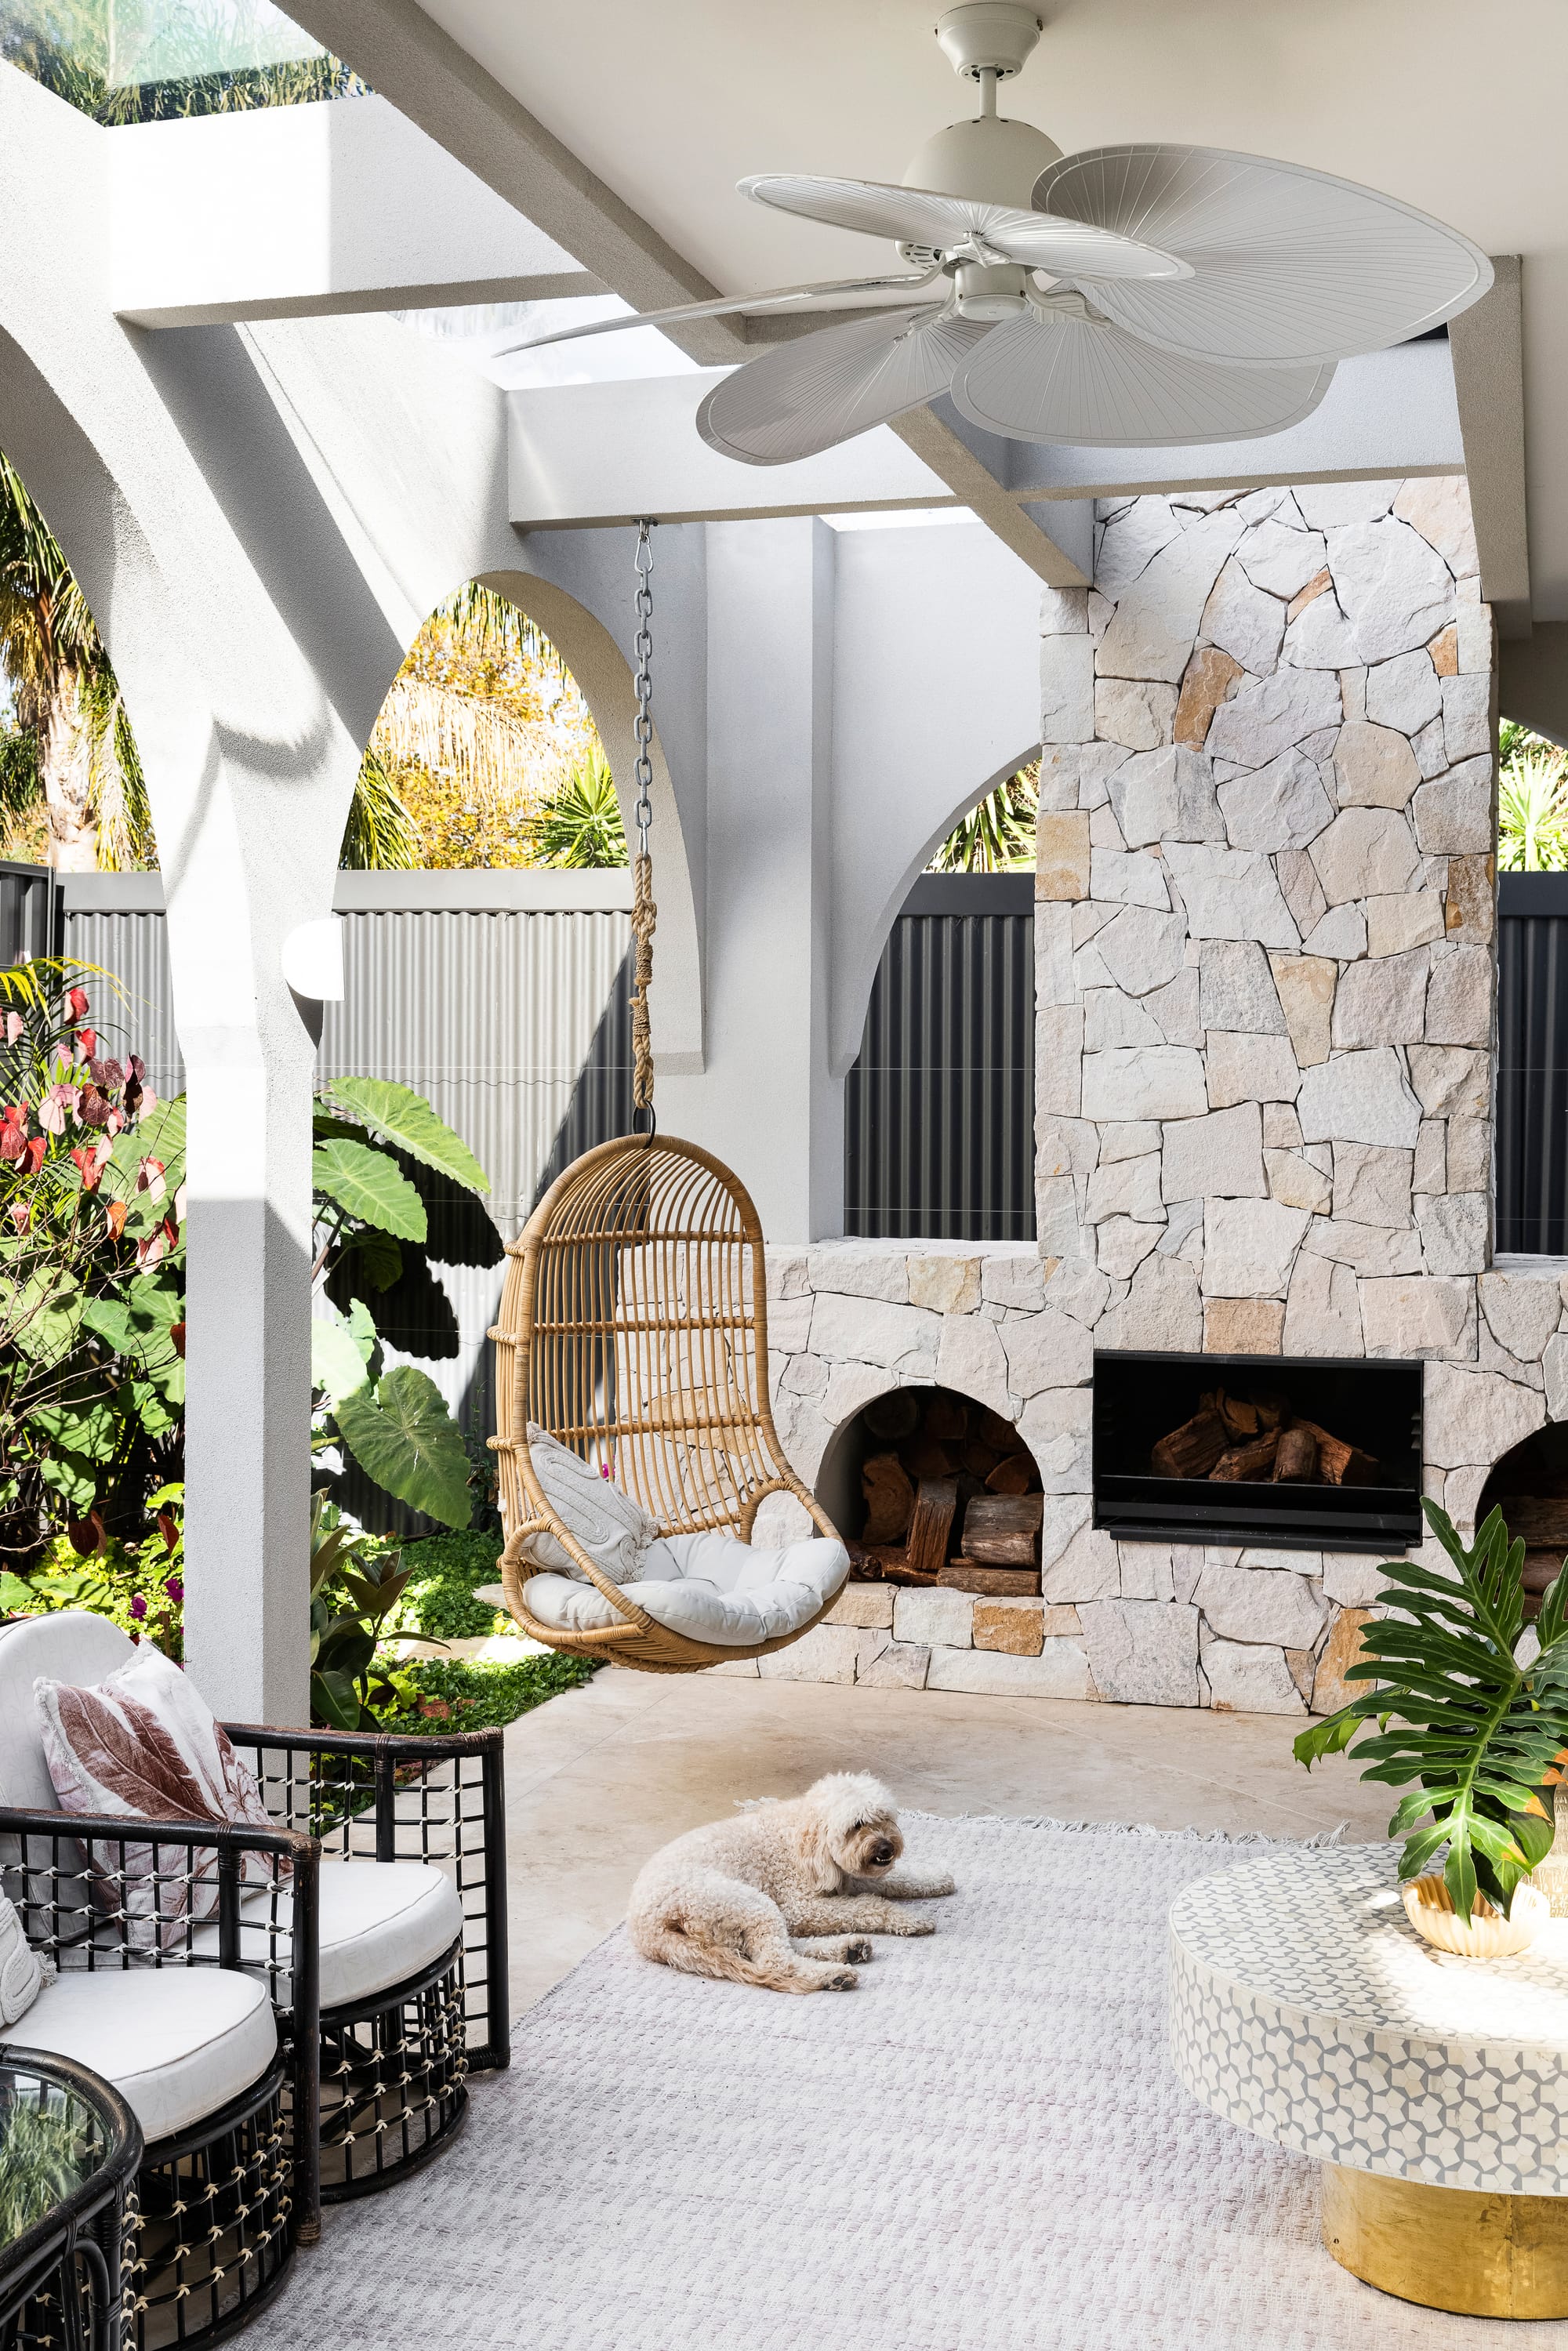 Goldsmith Residence by C.Kairouz Architects. Photography by Spacecraft. Outdoor courtyard with large stone fireplace and wood storage. Hanging rattan chair. White arches line walls. Dog lays on beige stone floor. 